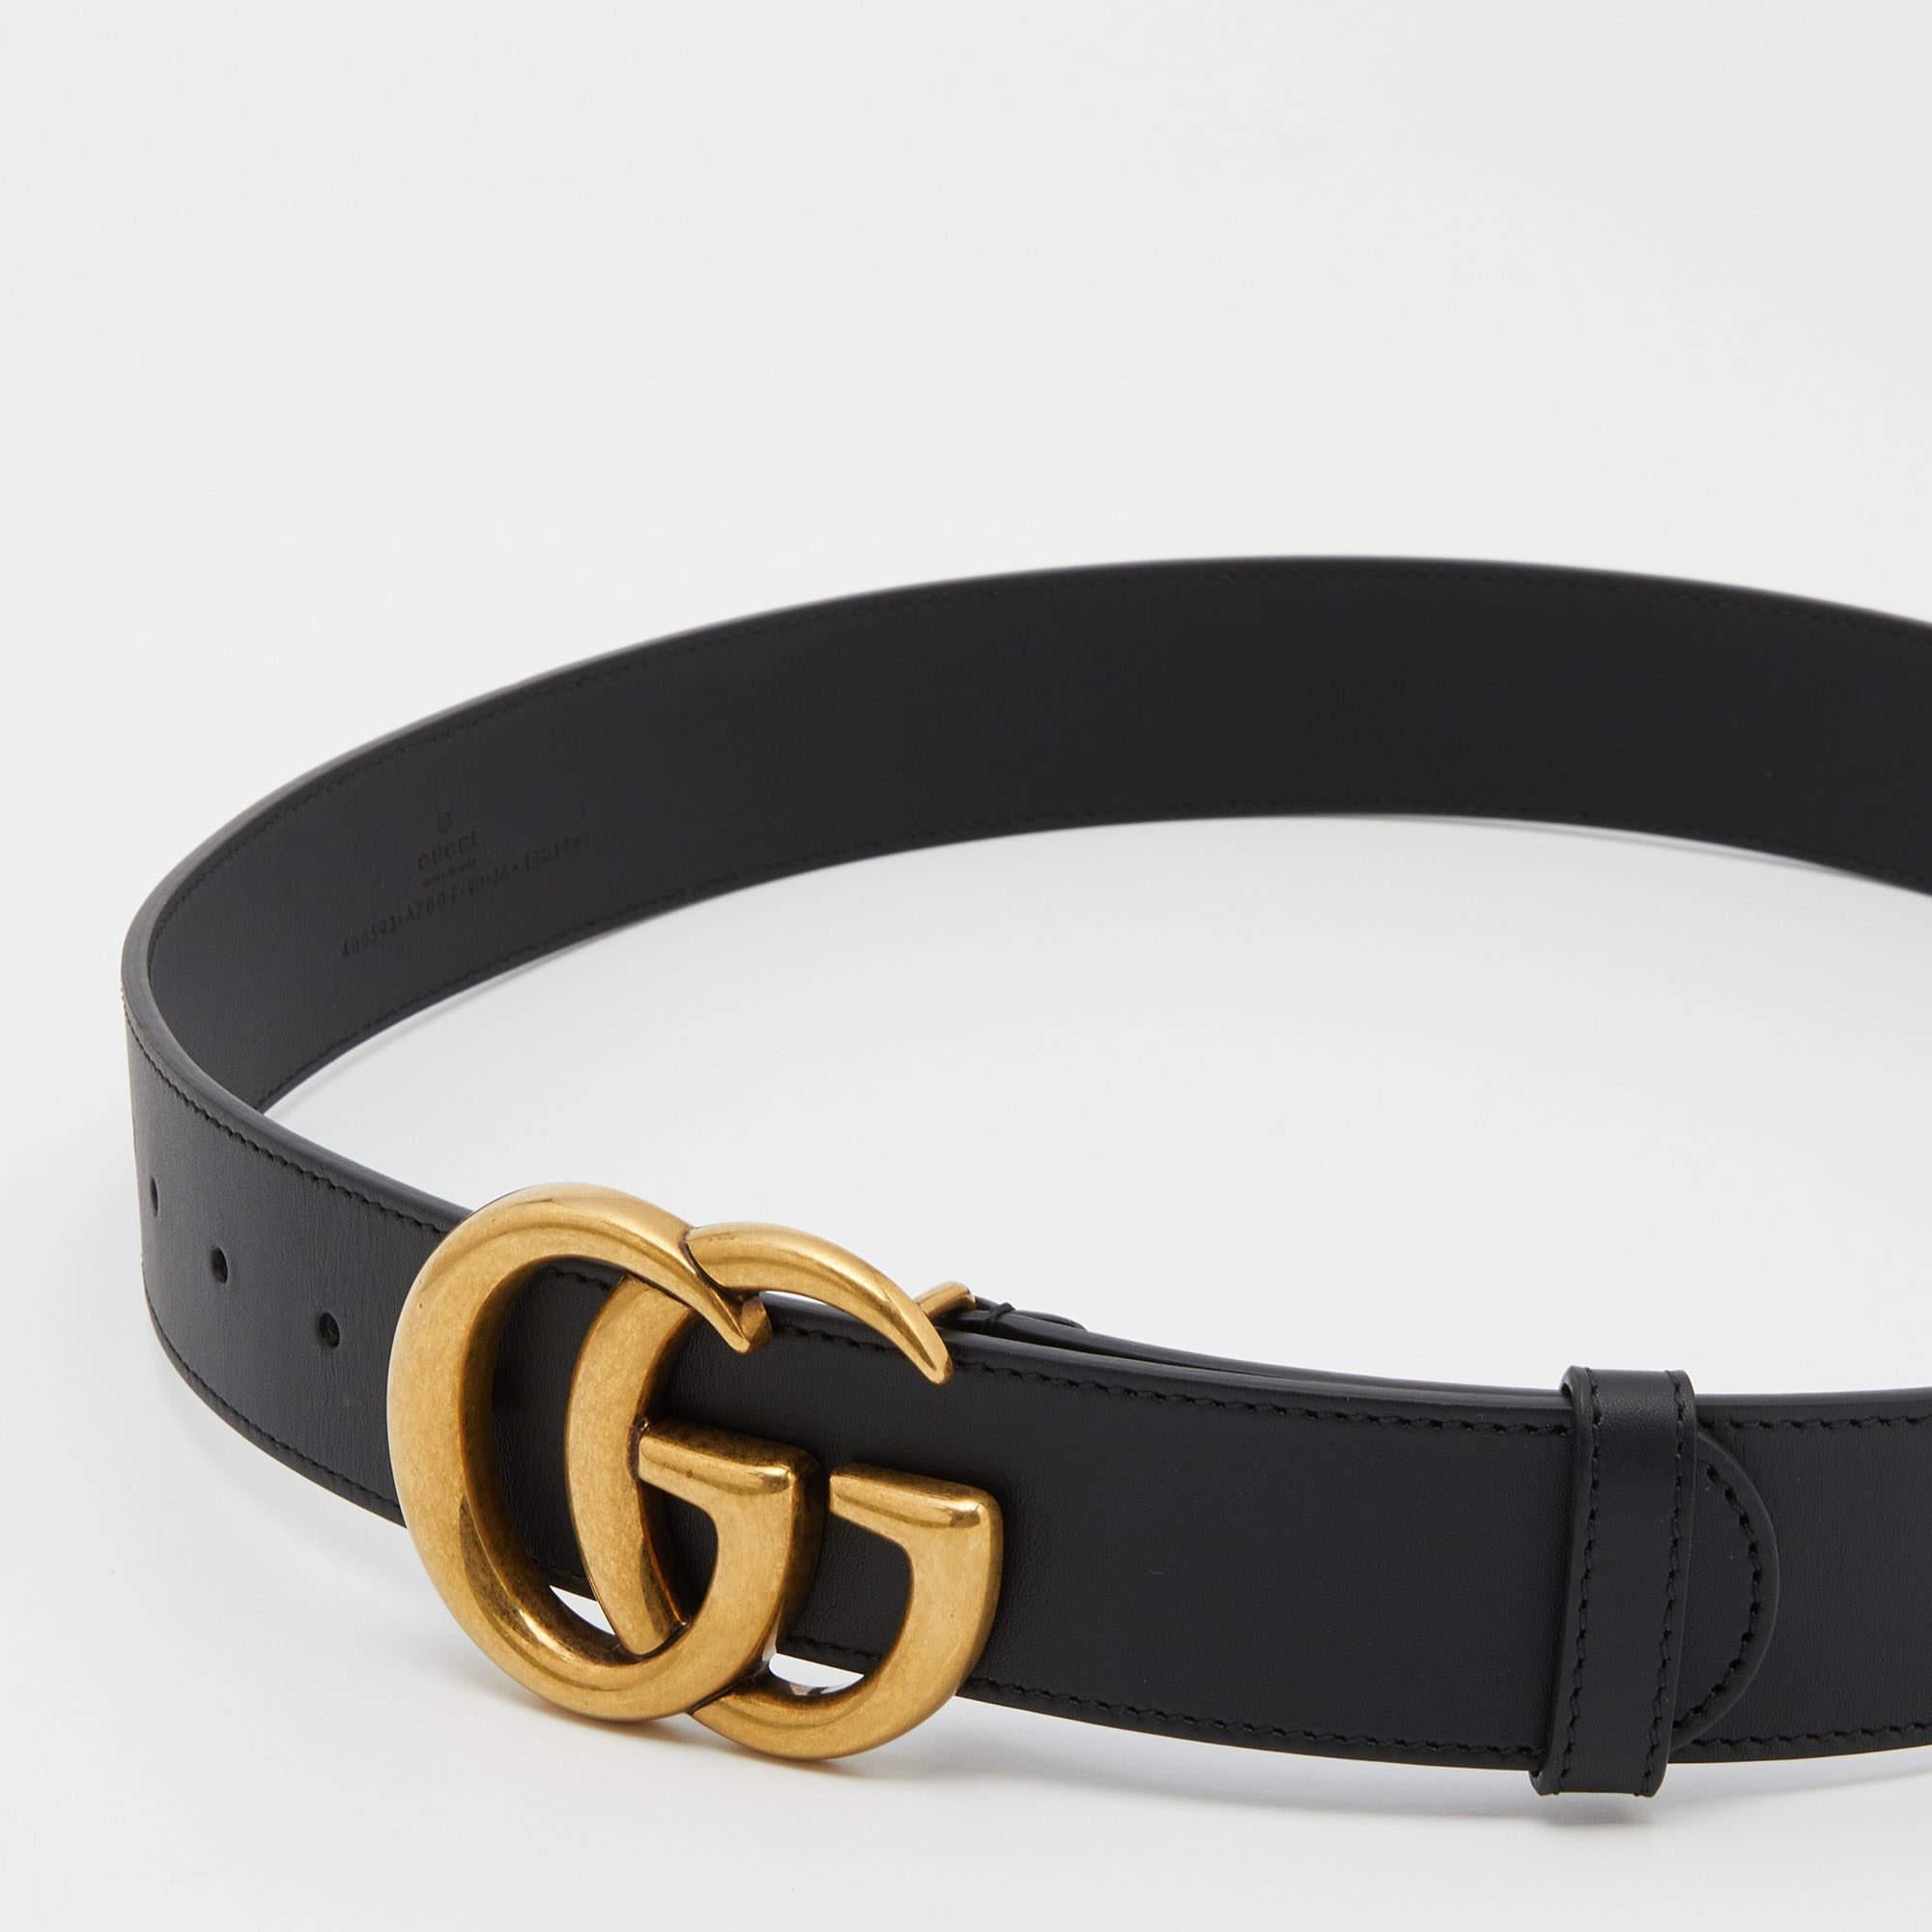 Coming from the House of Gucci, this stunning belt is made to offer you both elegance and signature charm! It is made from black leather with a gold-toned double G buckle attached to the front. This slim belt is super sturdy and measures 90cm in